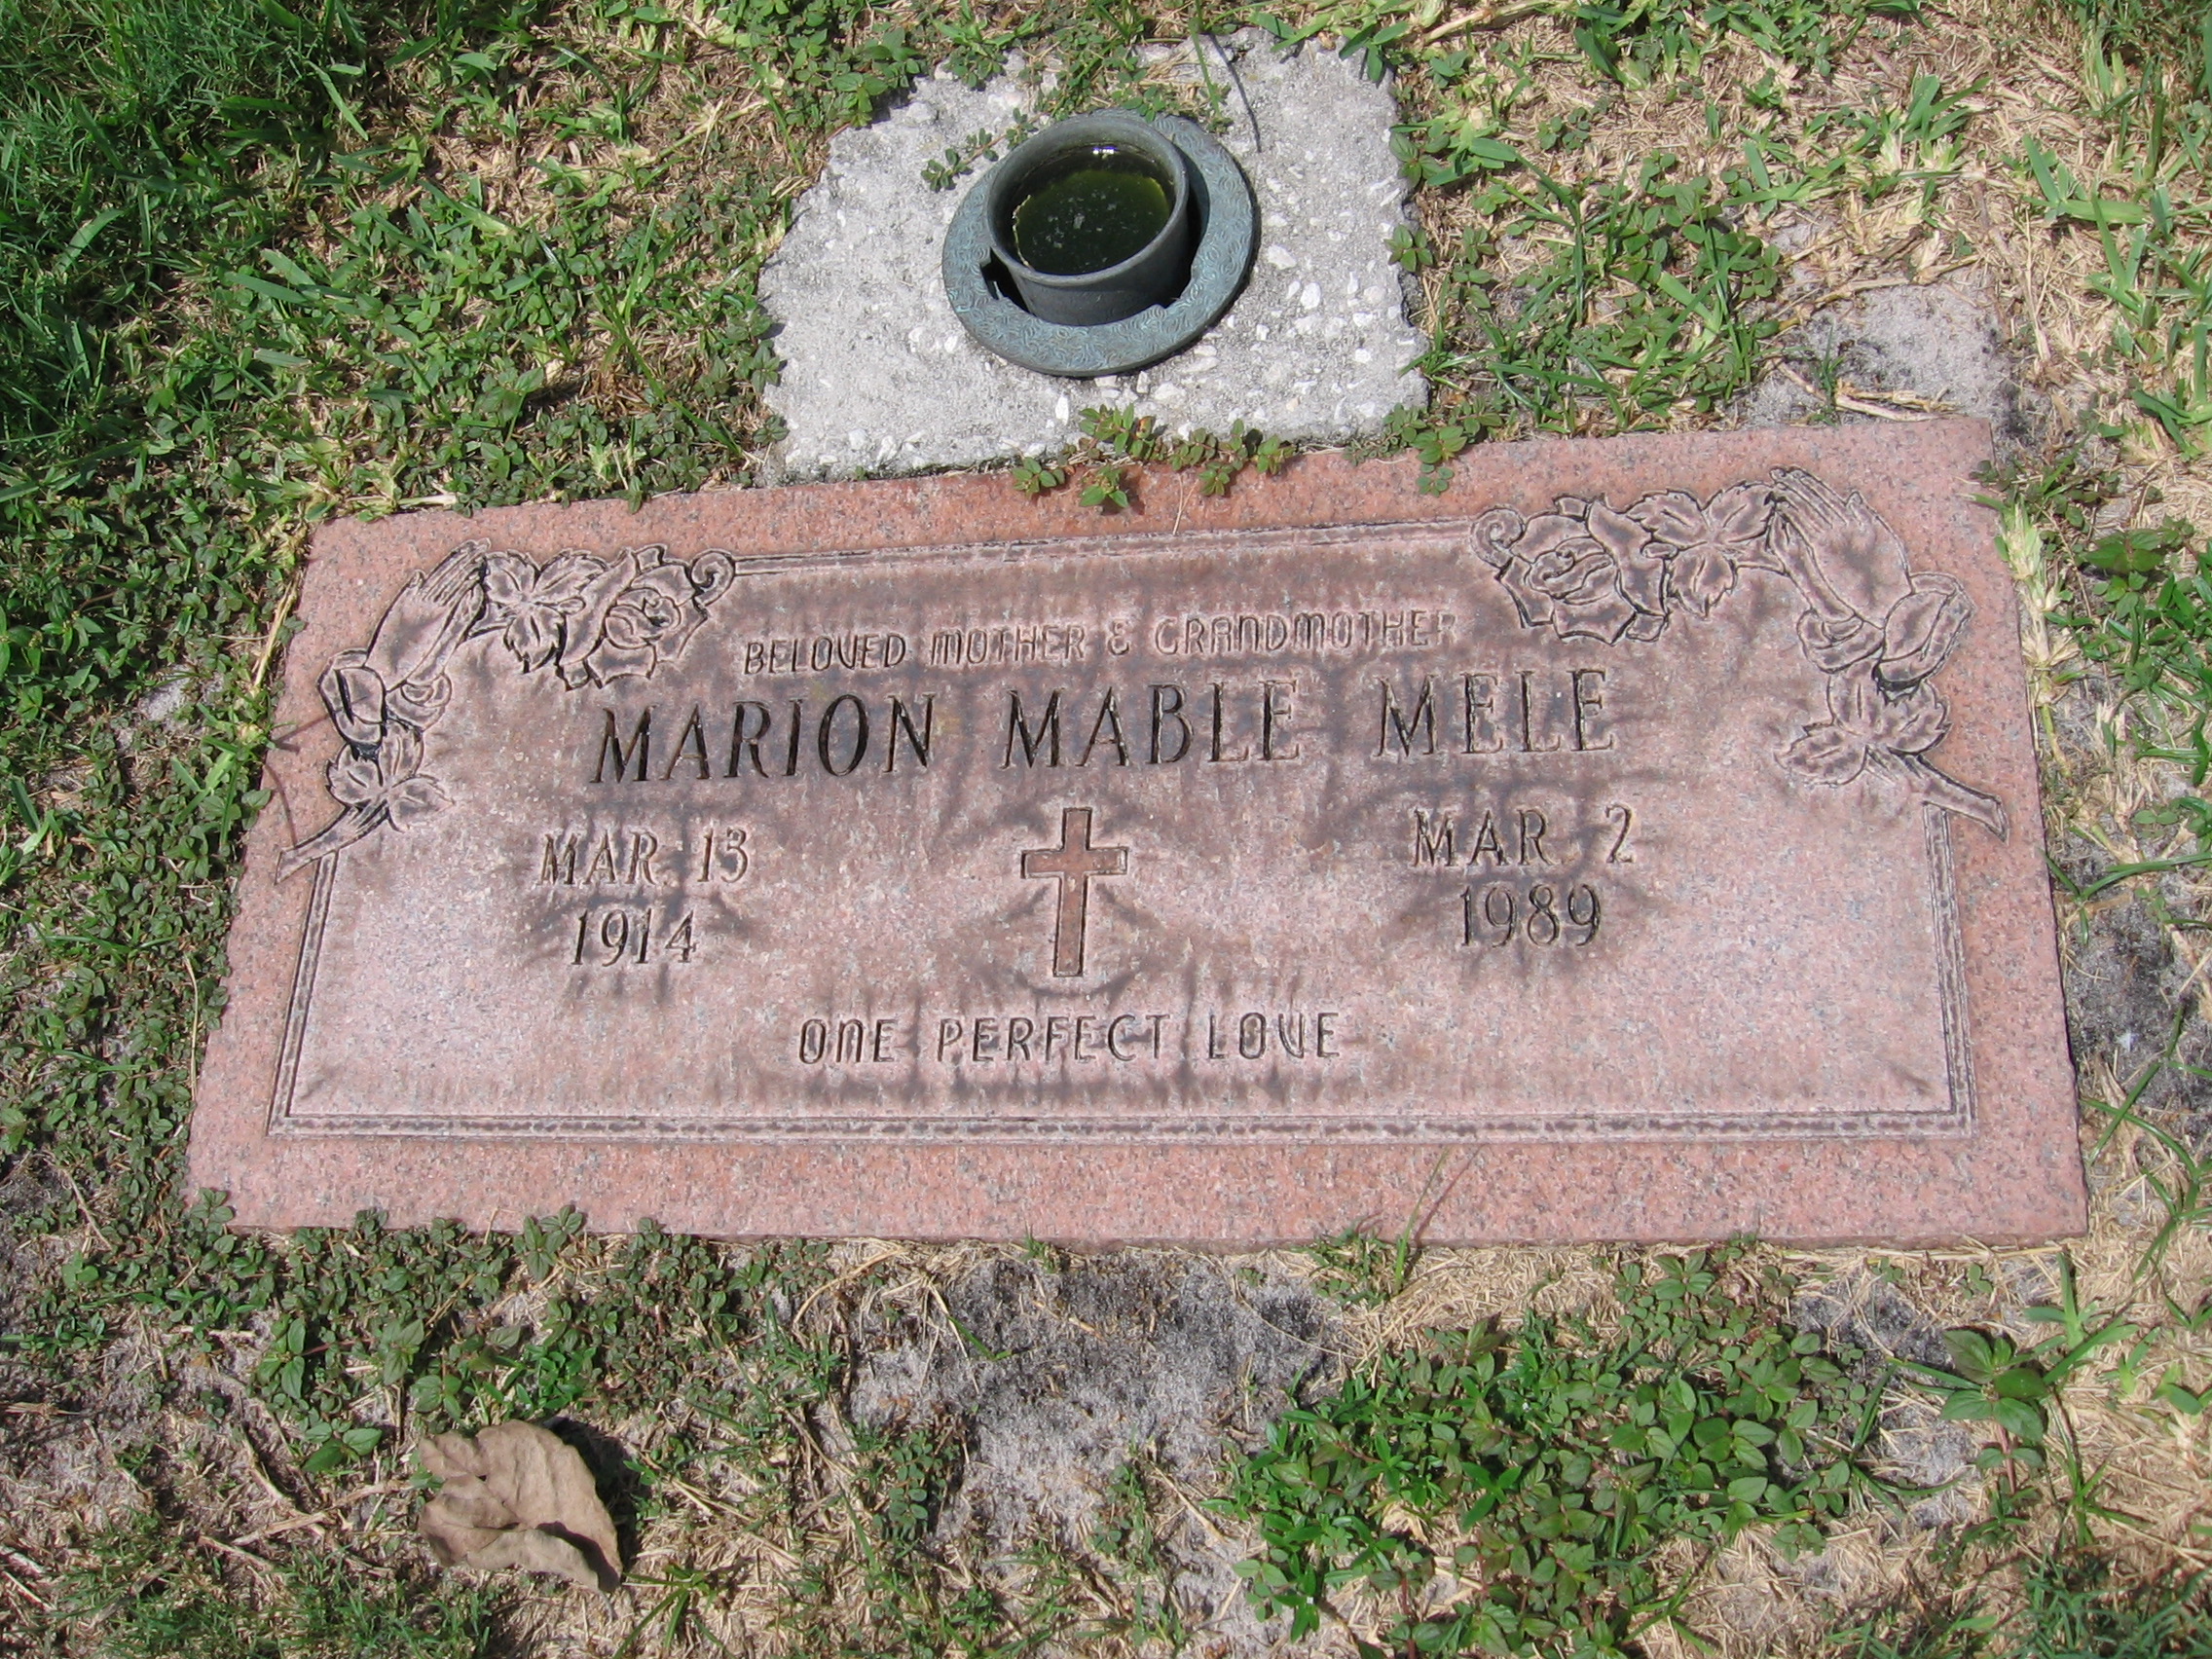 Marion Mable Mele